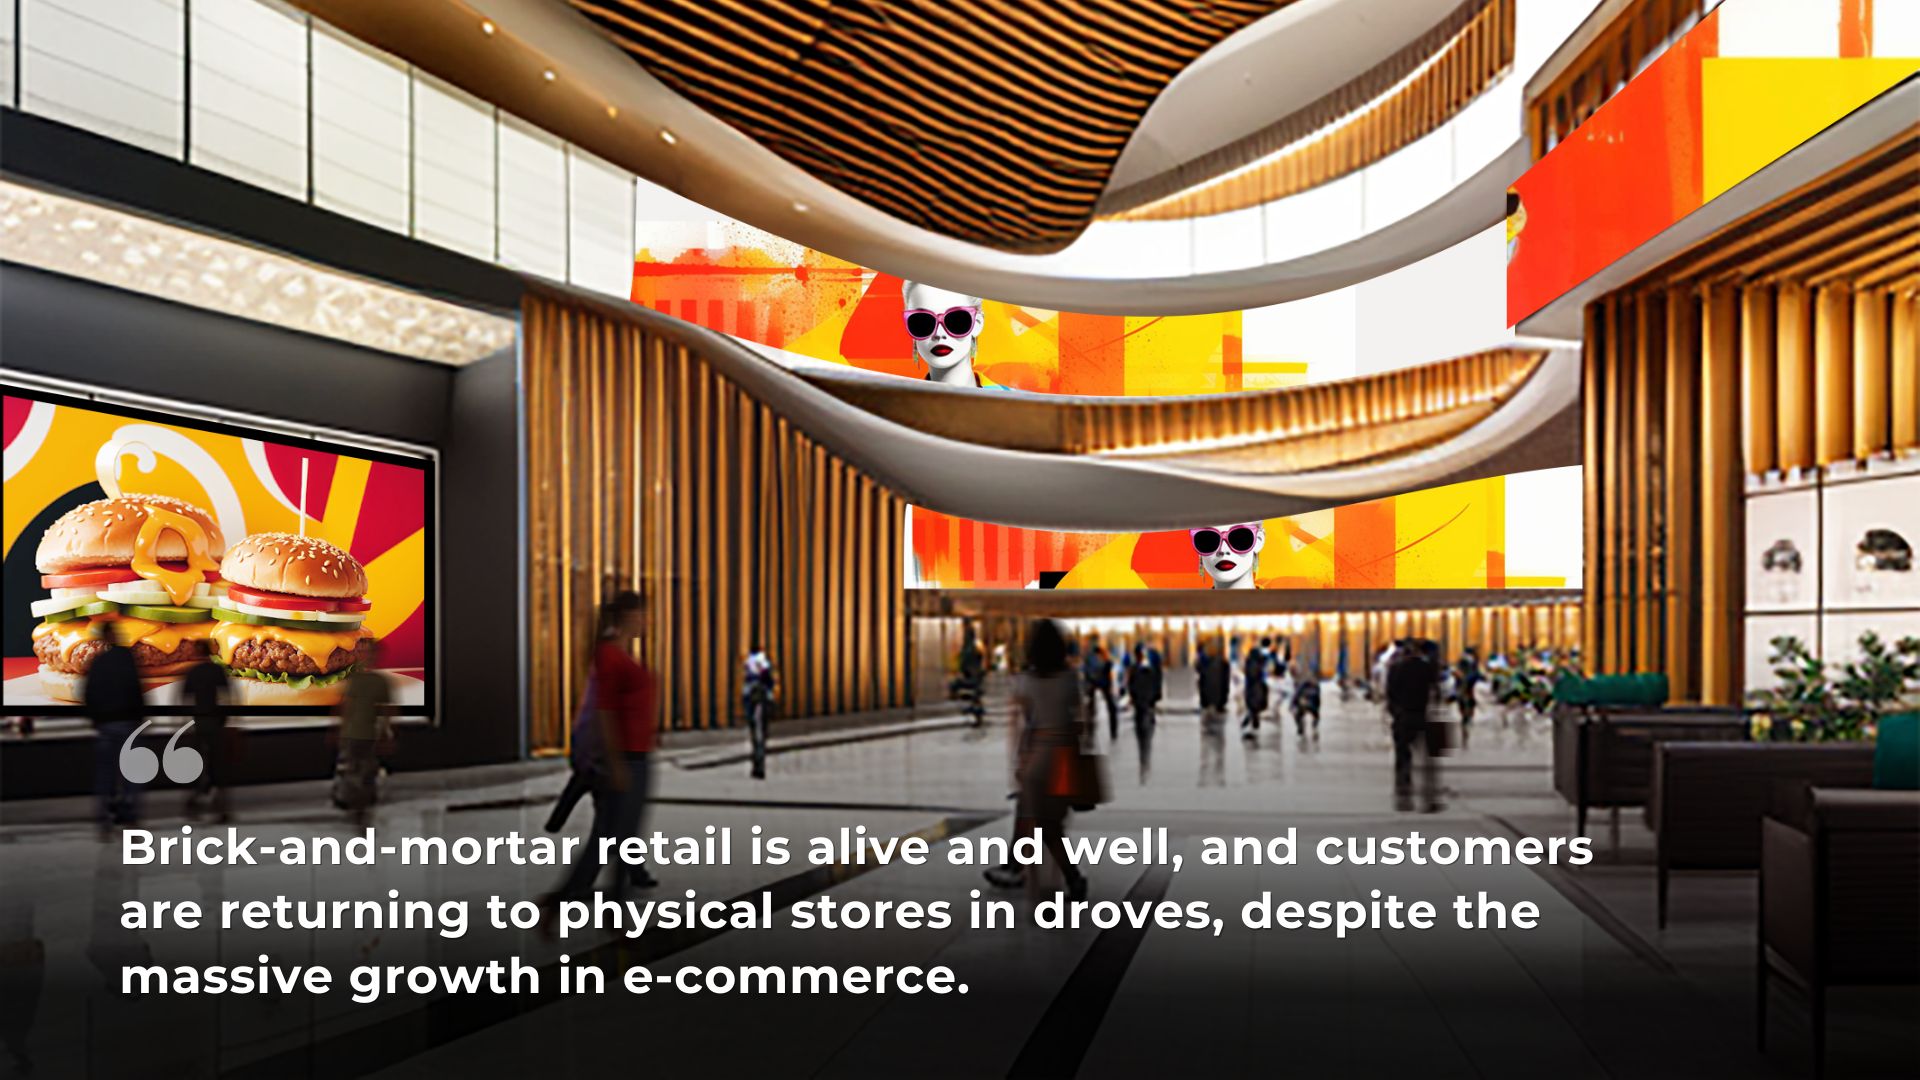 Mall Digital Signage Solutions: transforming the mall experience